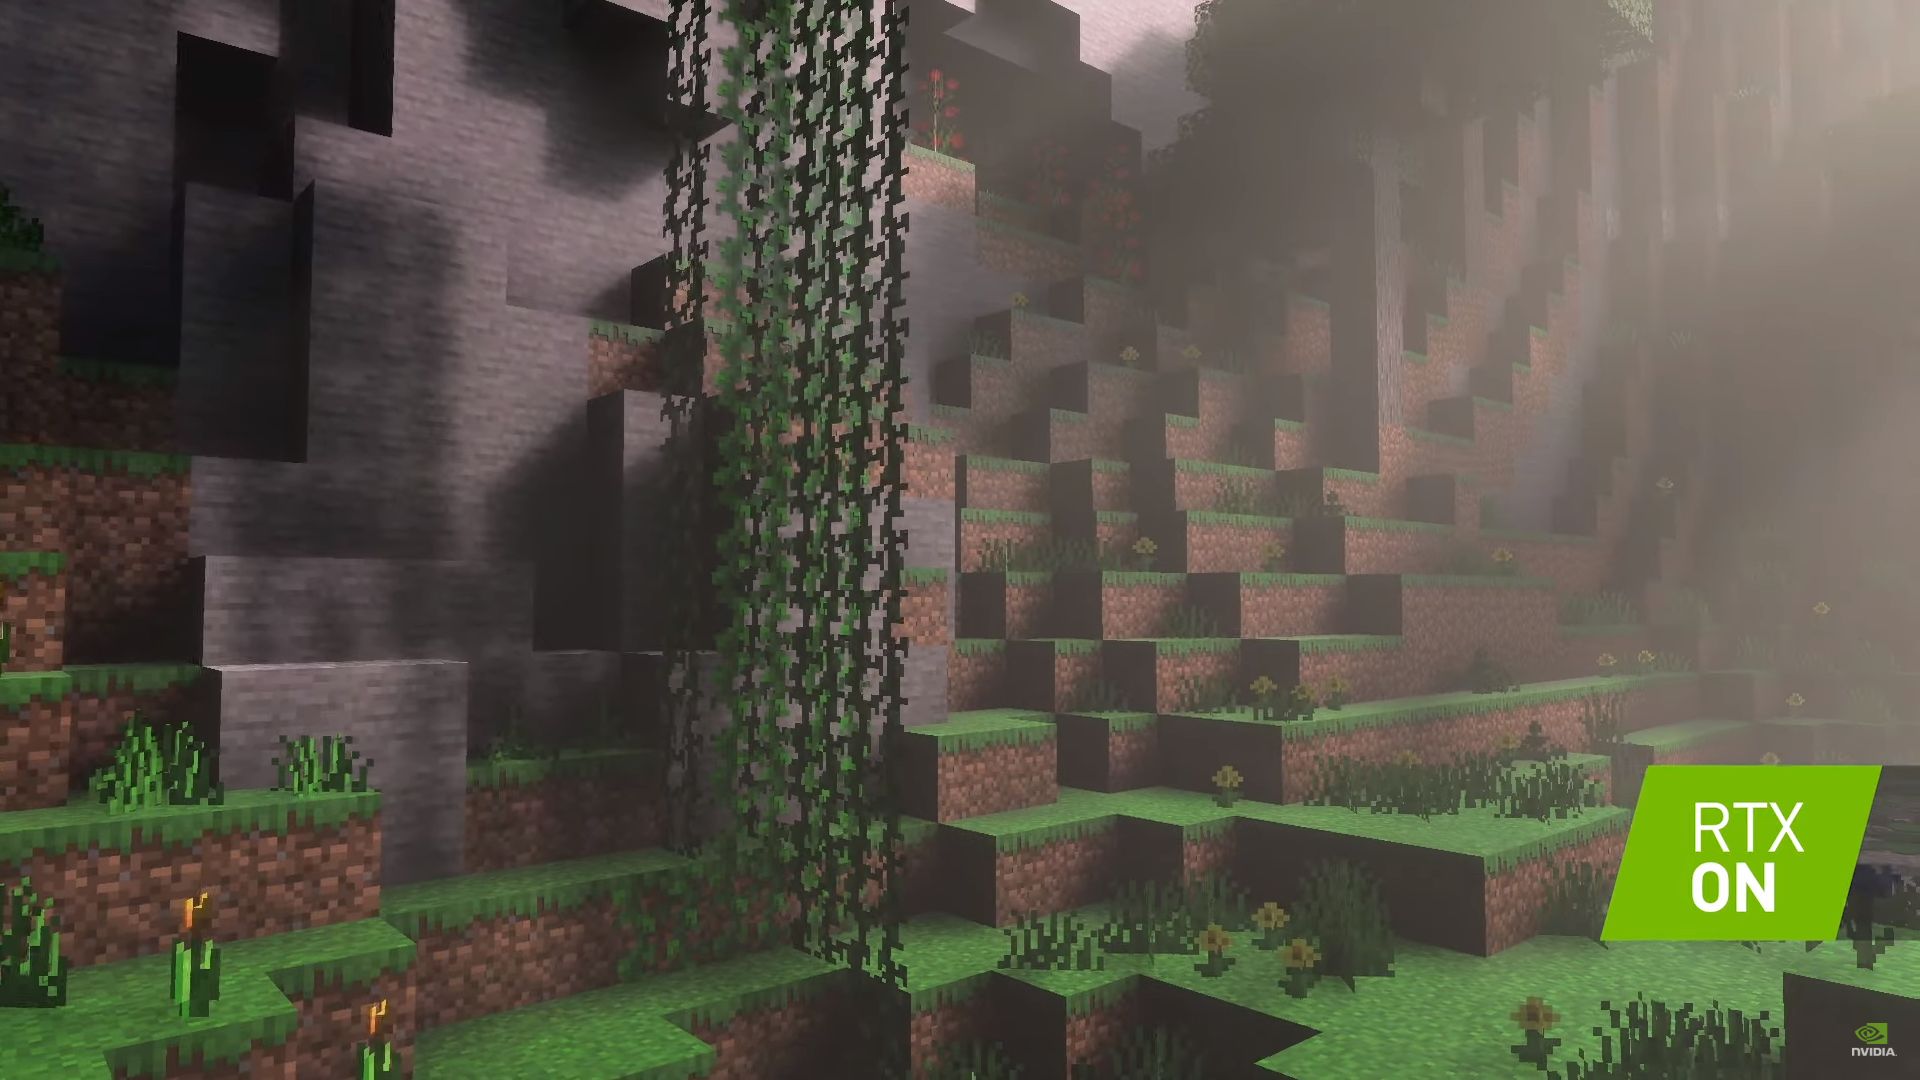 Minecraft with RTX: The World's Best Selling Videogame Is Adding Ray Tracing